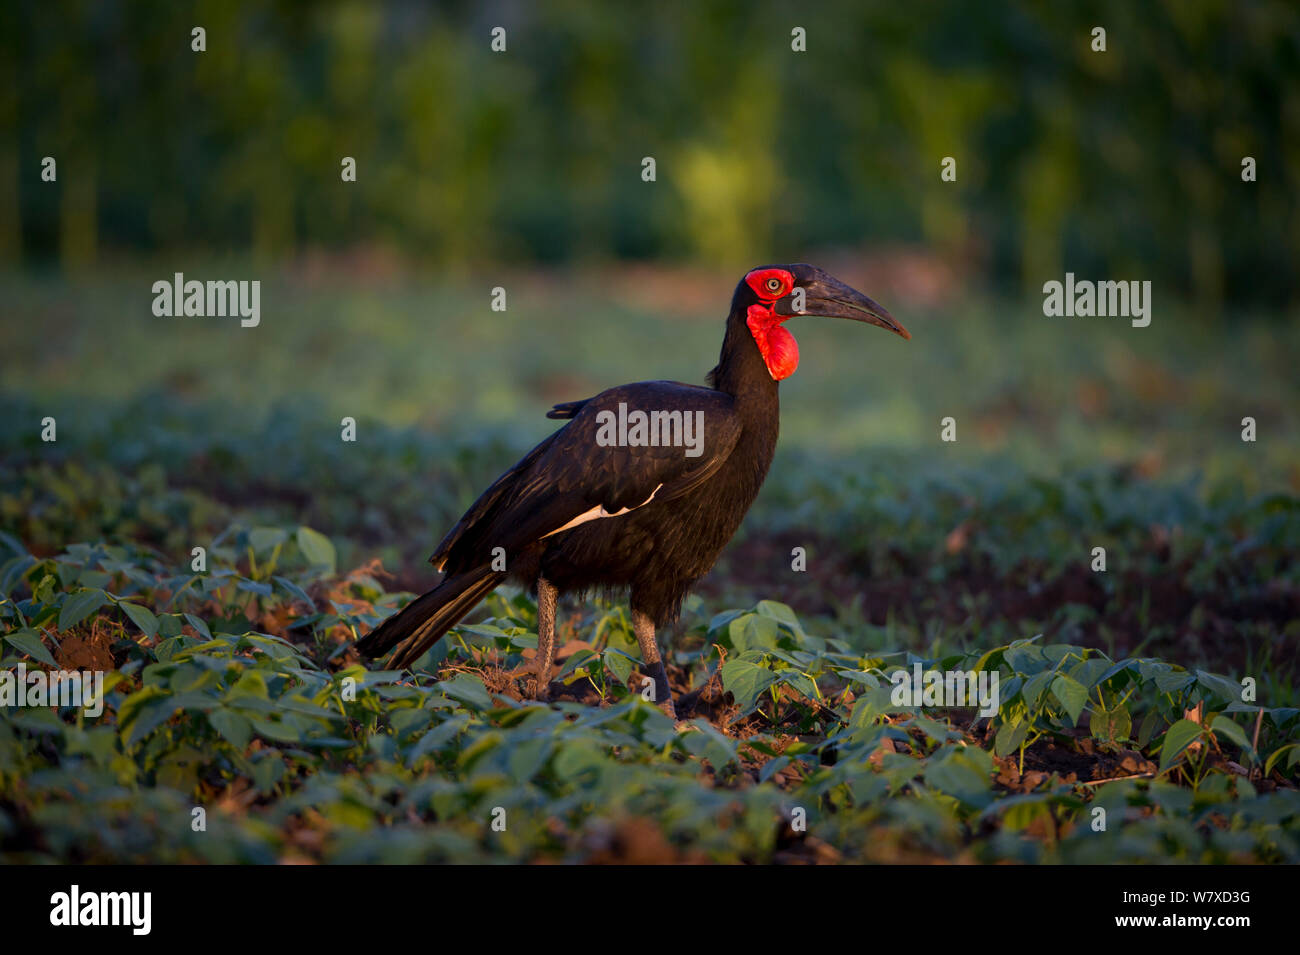 Abyssian ground hornbill (Bucorvus abyssinicus) foraging in a field of beans. Commercial farm, Tanzania, East Africa. Stock Photo